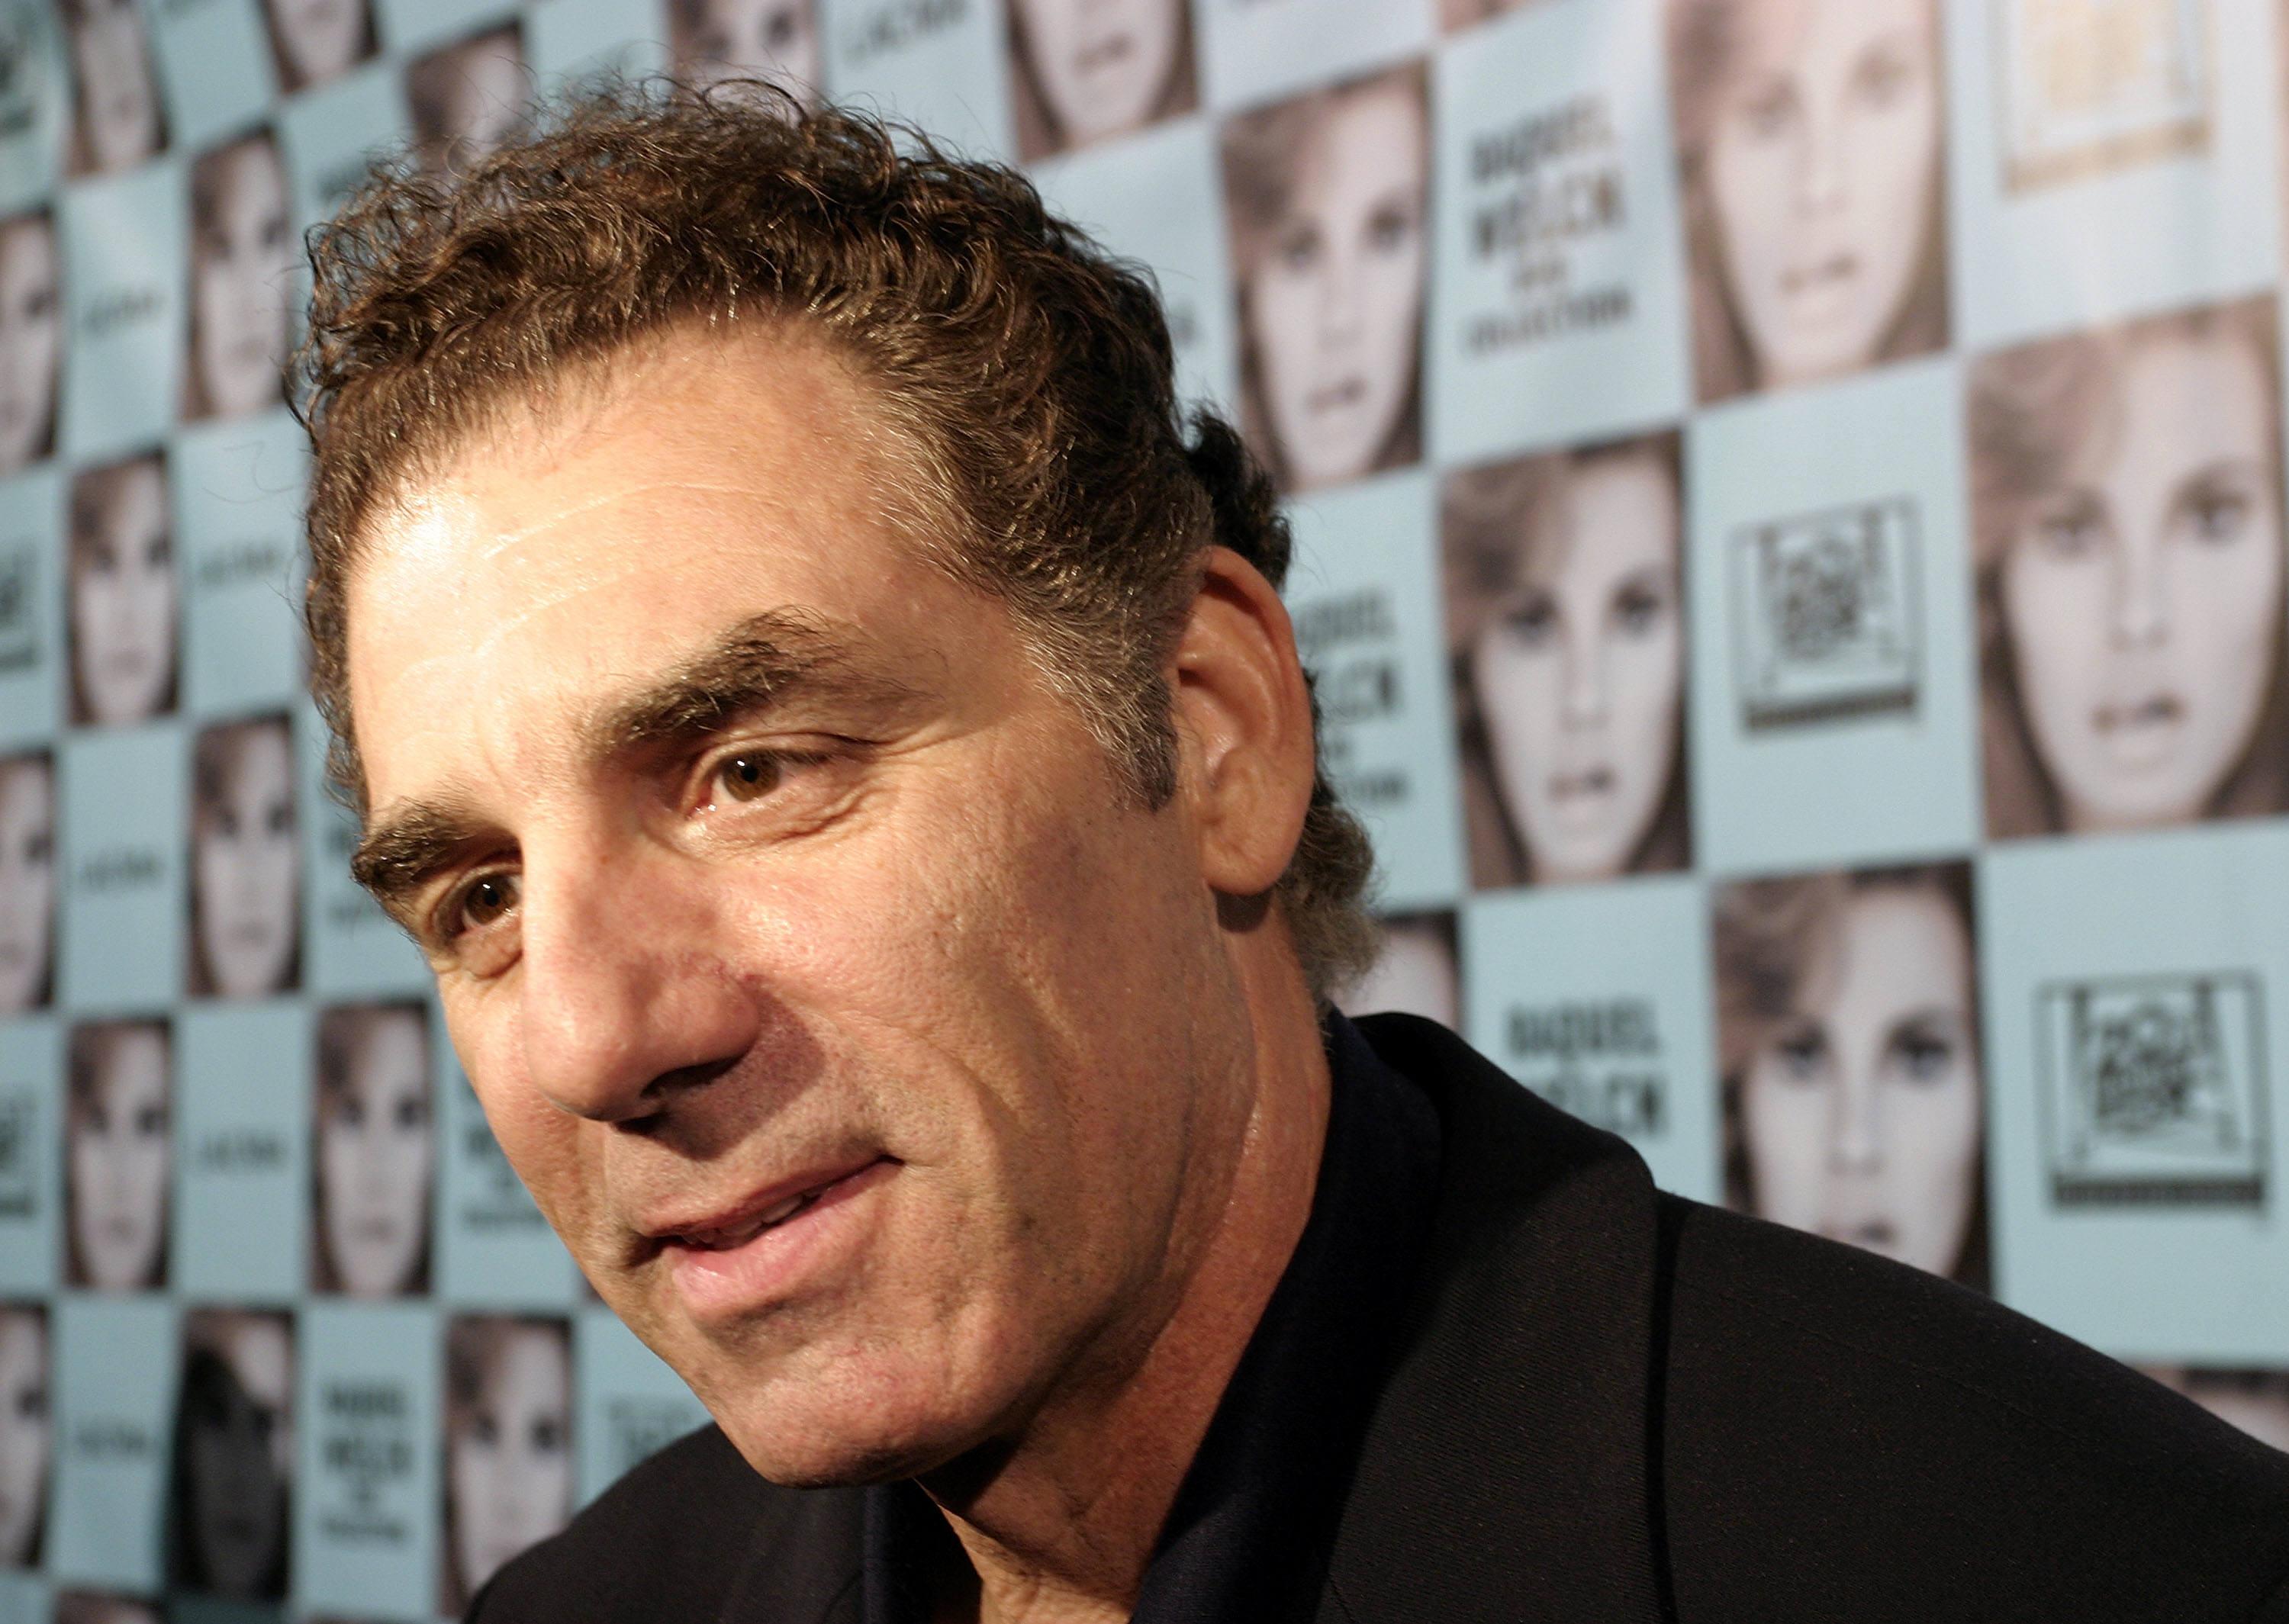 (FILES): This 04 March 2004 file photo shows US actor Michael Richards during the tribute to legend Raquel Welch in Los Angeles, California.  Former "Seinfeld" star Richards shocked audience members at a famous Los Angeles comedy club with a tirade of racist abuse, video footage showed 20 November 2006.  Richards, best known for playing wacky neighbour Cosmo Kramer in the smash-hit sitcom, uncorked a string of racial epithets after reportedly being heckled by two black audience members at the Laugh Factory 17 November 2006.  Richards' representatives at the William Morris Agency had no immediate comment on the controversy.  Giulio Marcocchi/Getty Images/AFP PHOTO   == FOR NEWSPAPERS, INTERNET, TELCOS & TELEVISION USE ONLY ==